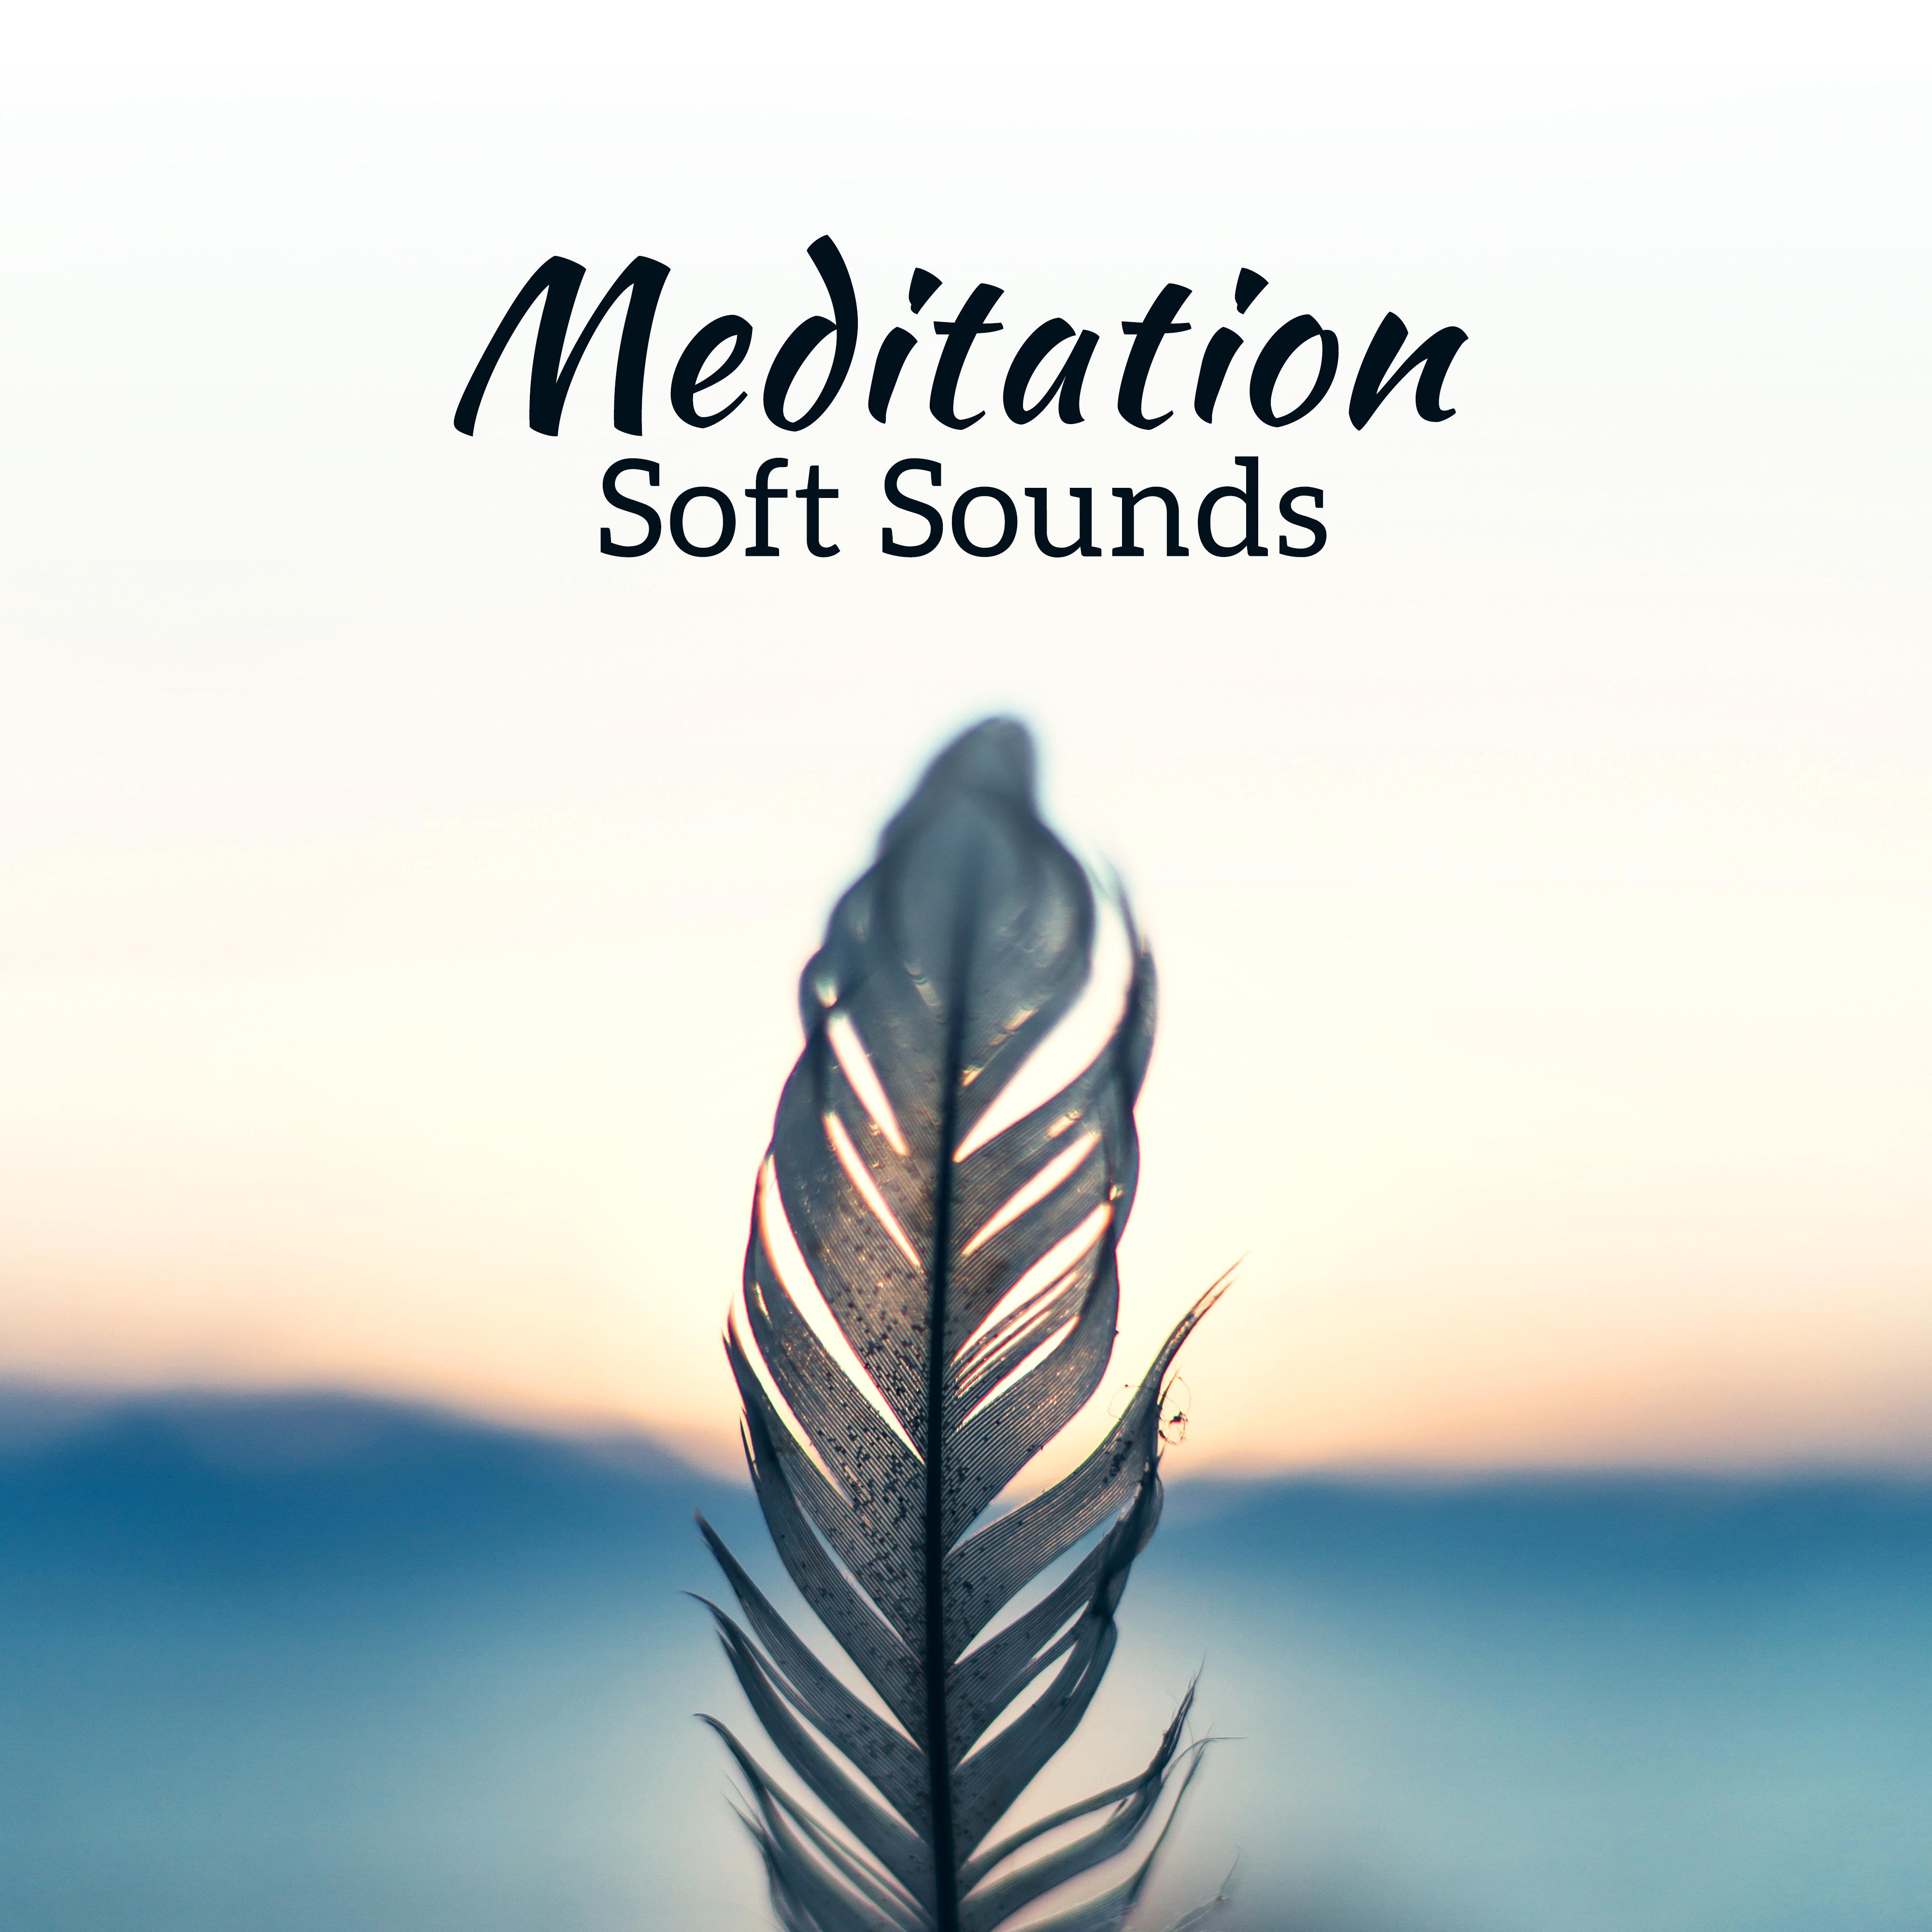 Meditation Soft Sounds  Easy Listening, Peaceful Songs, Chilled Melodies, Meditation  Relaxation, Zen Garden